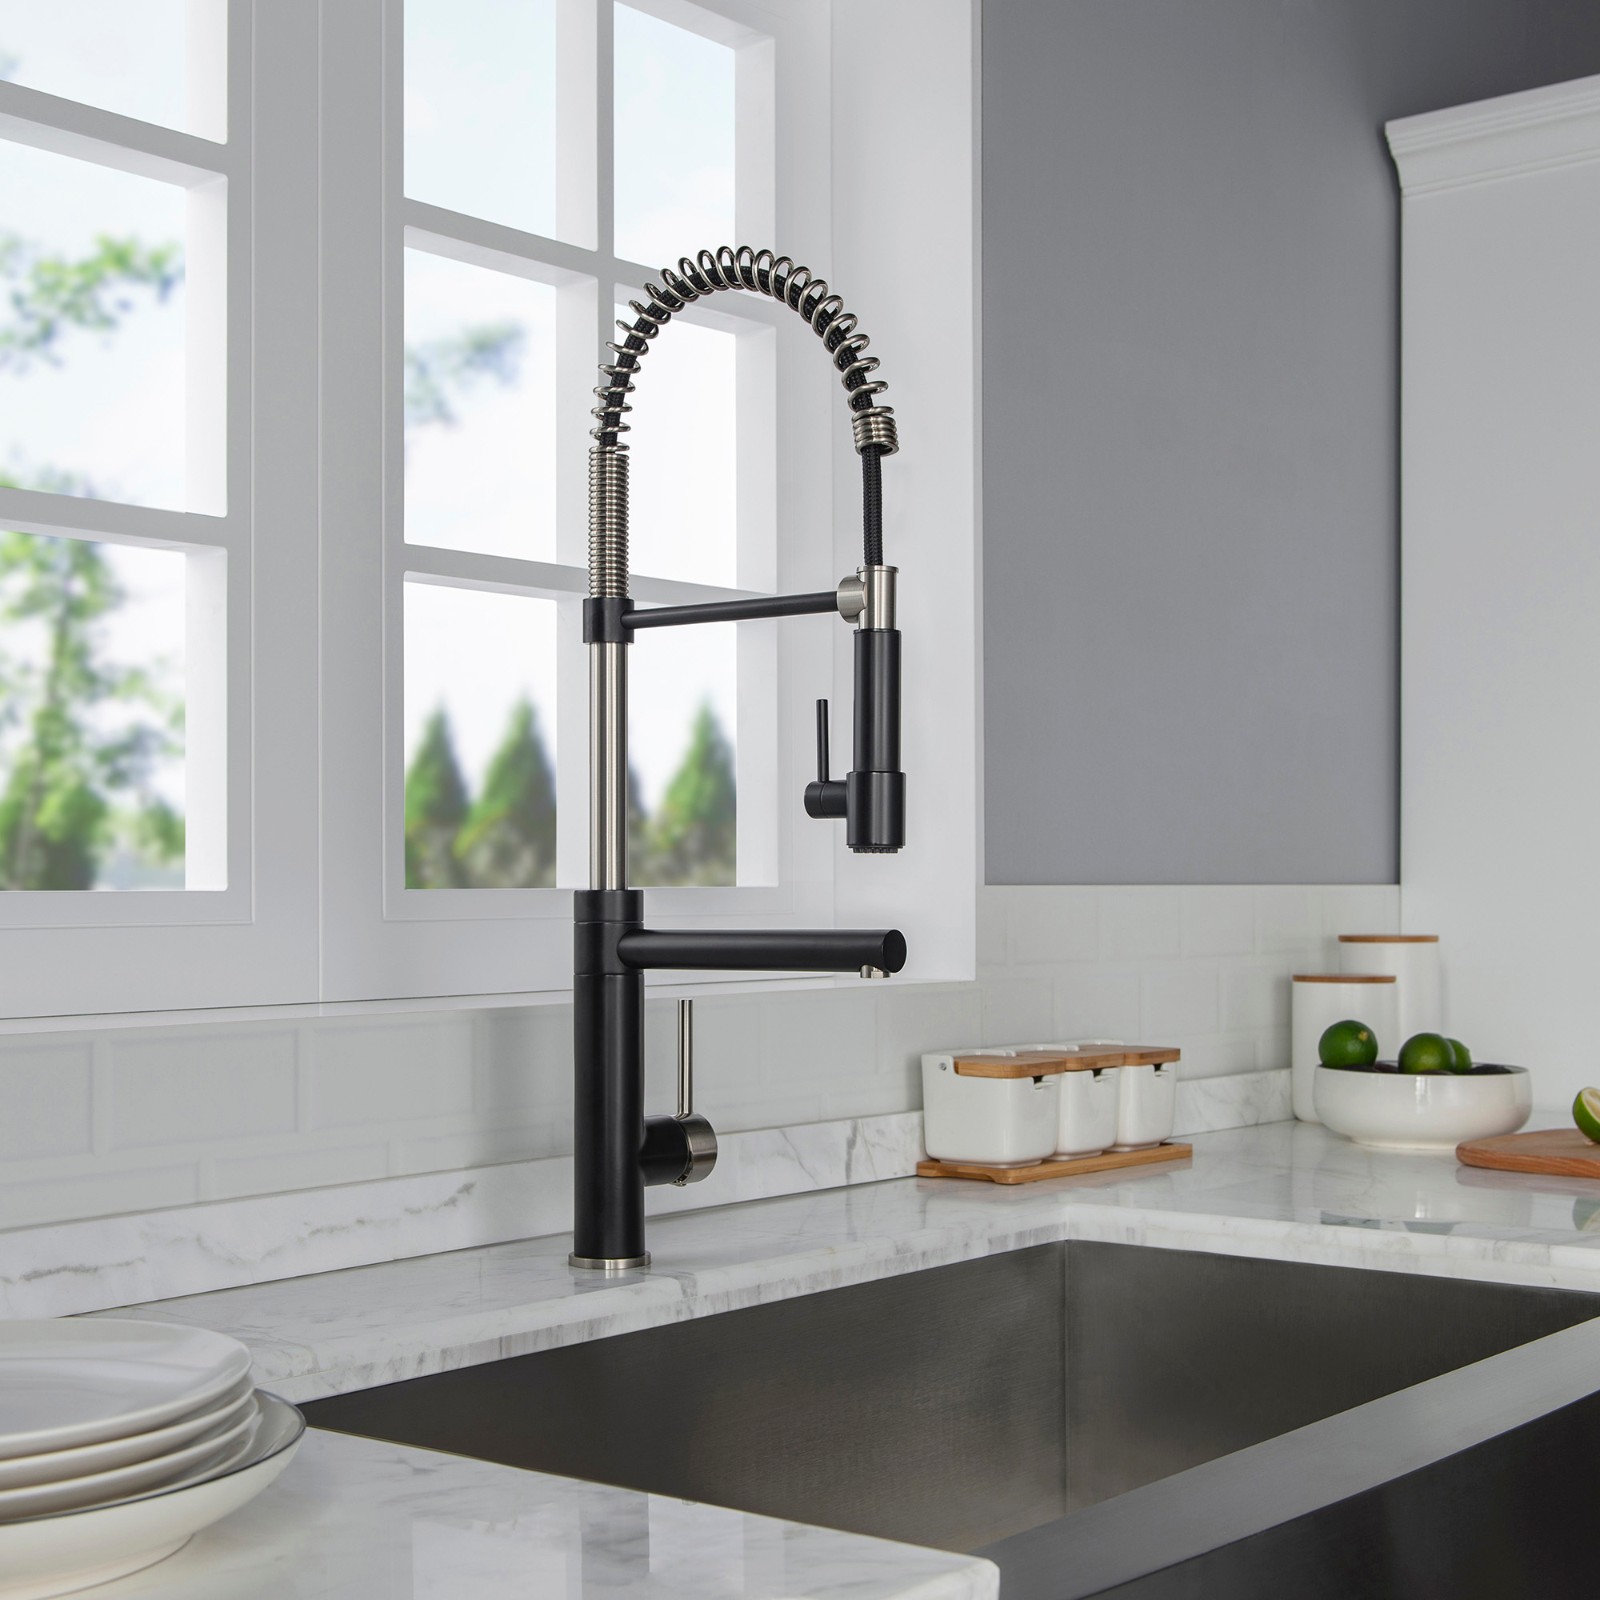  WOODBRIDGE WK060501BL Stainless Steel Single Handle Pre-Rinse Pull Down Kitchen Faucet and Pot Filler in Matte Black Finish._5030